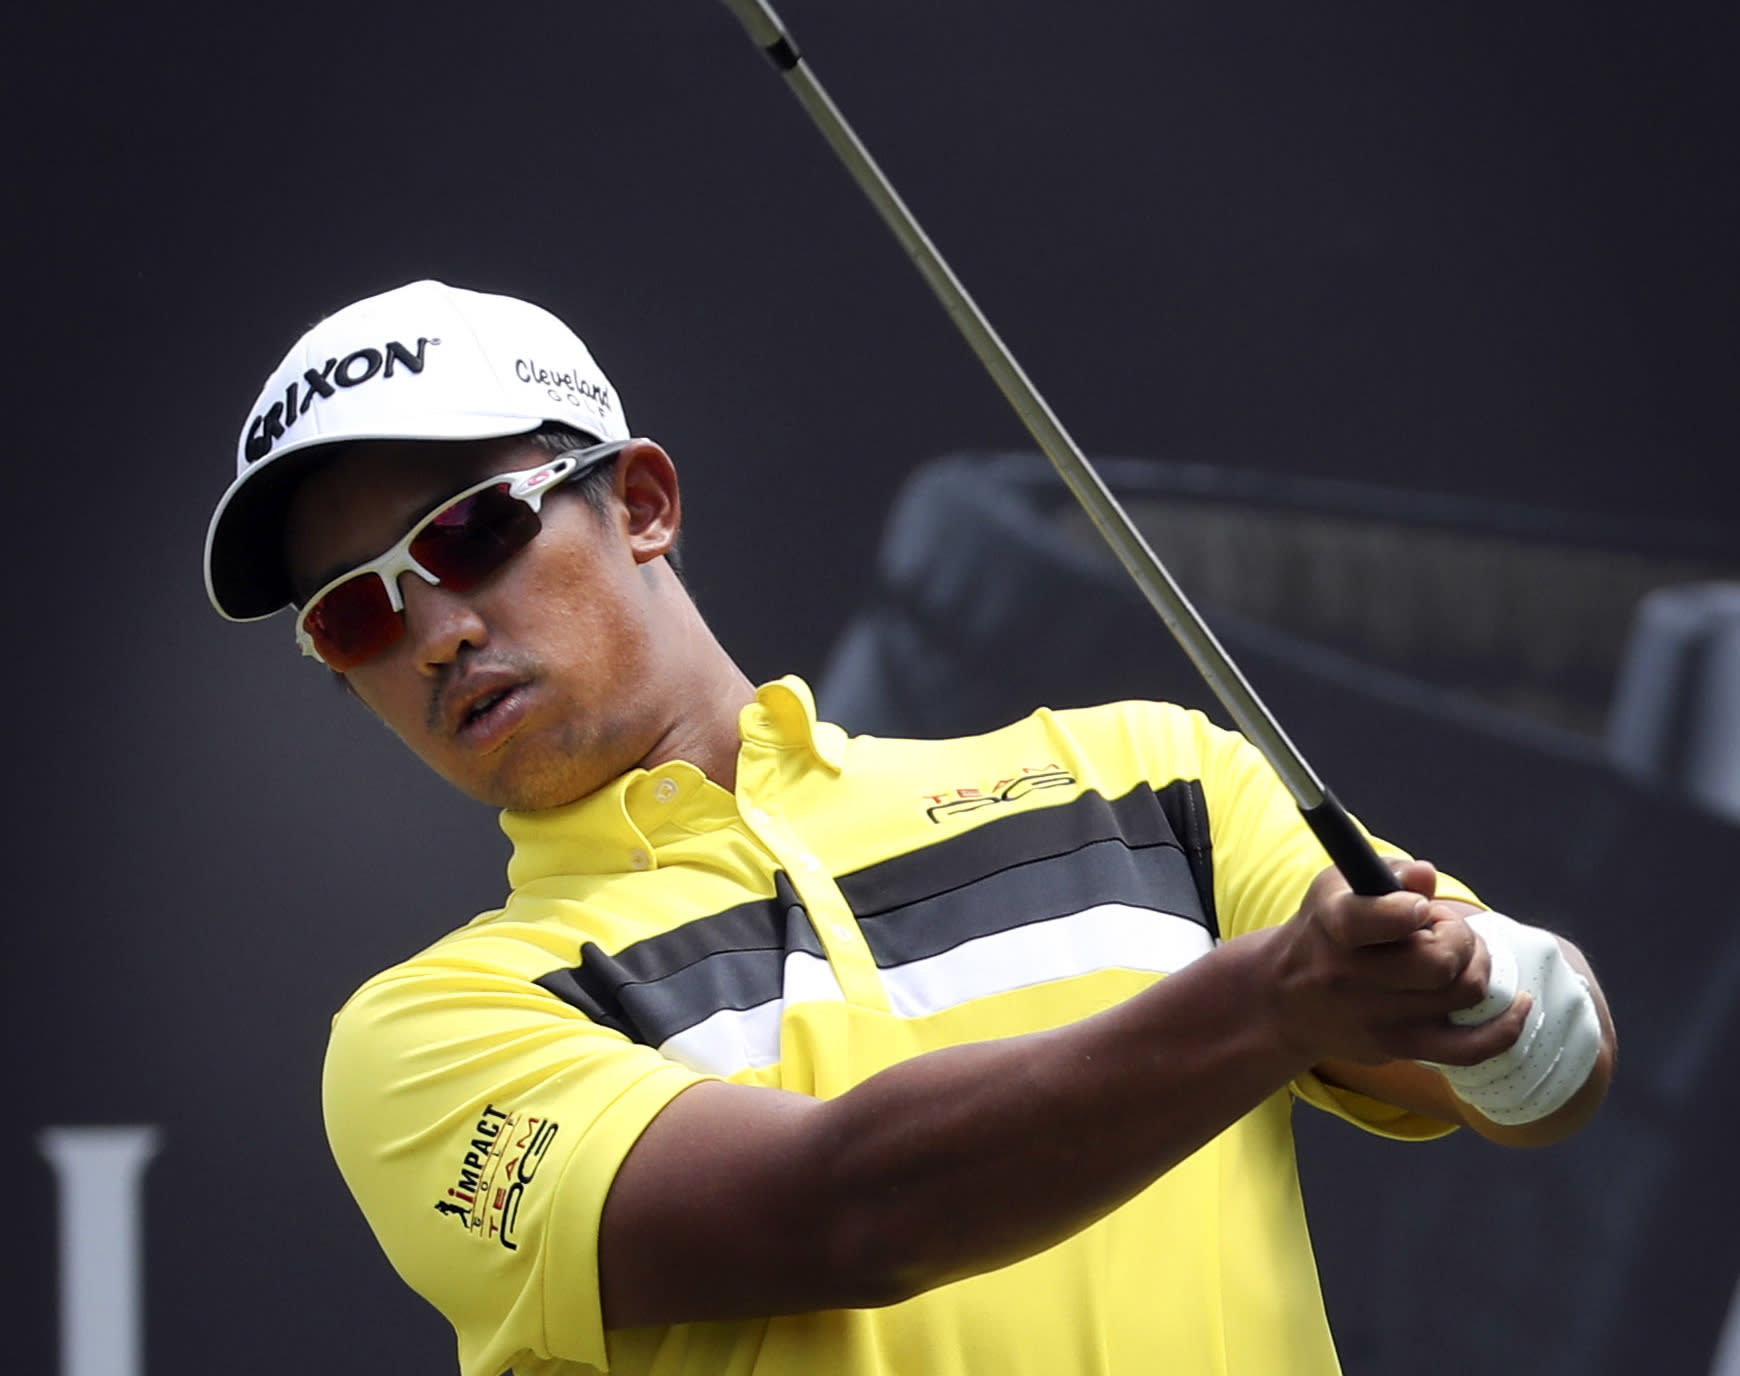 Player dies in hotel room, 4th round of tournament canceled - 